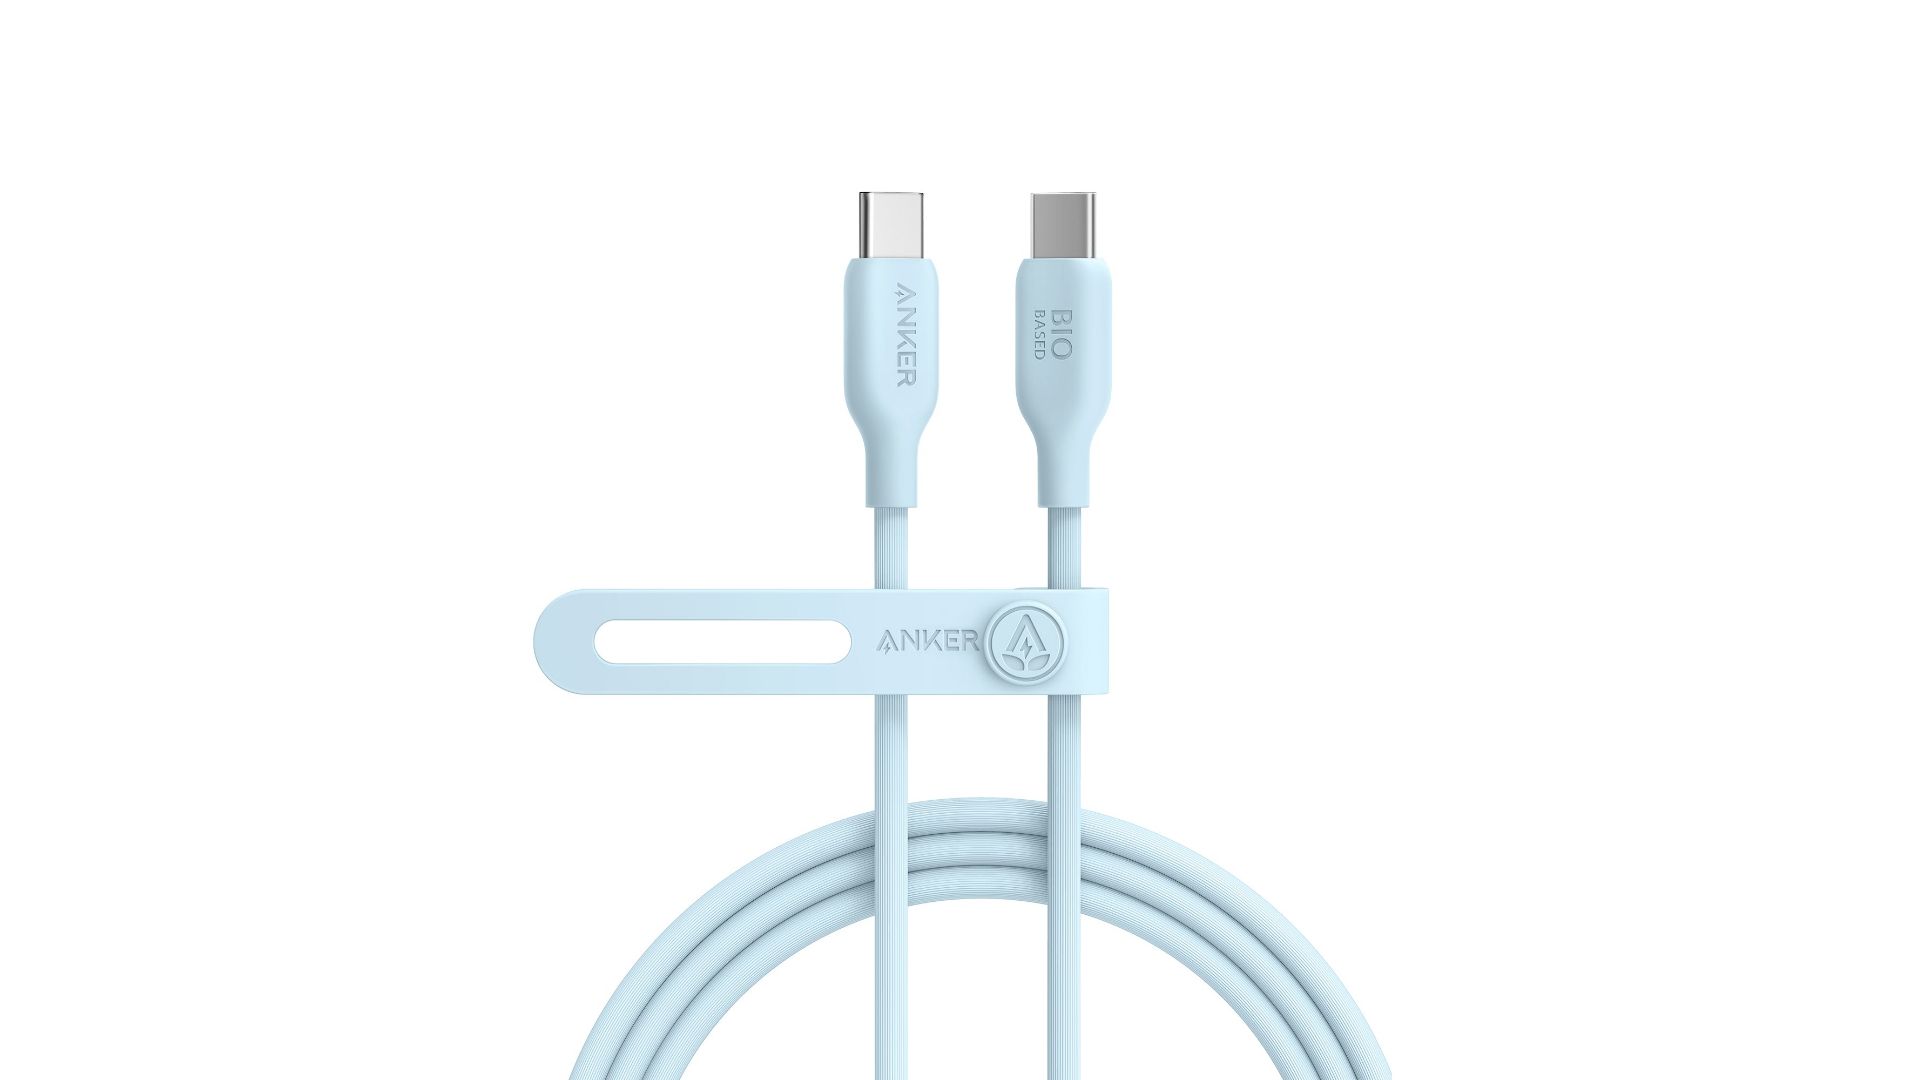 anker 543 usb-c cable bio-based